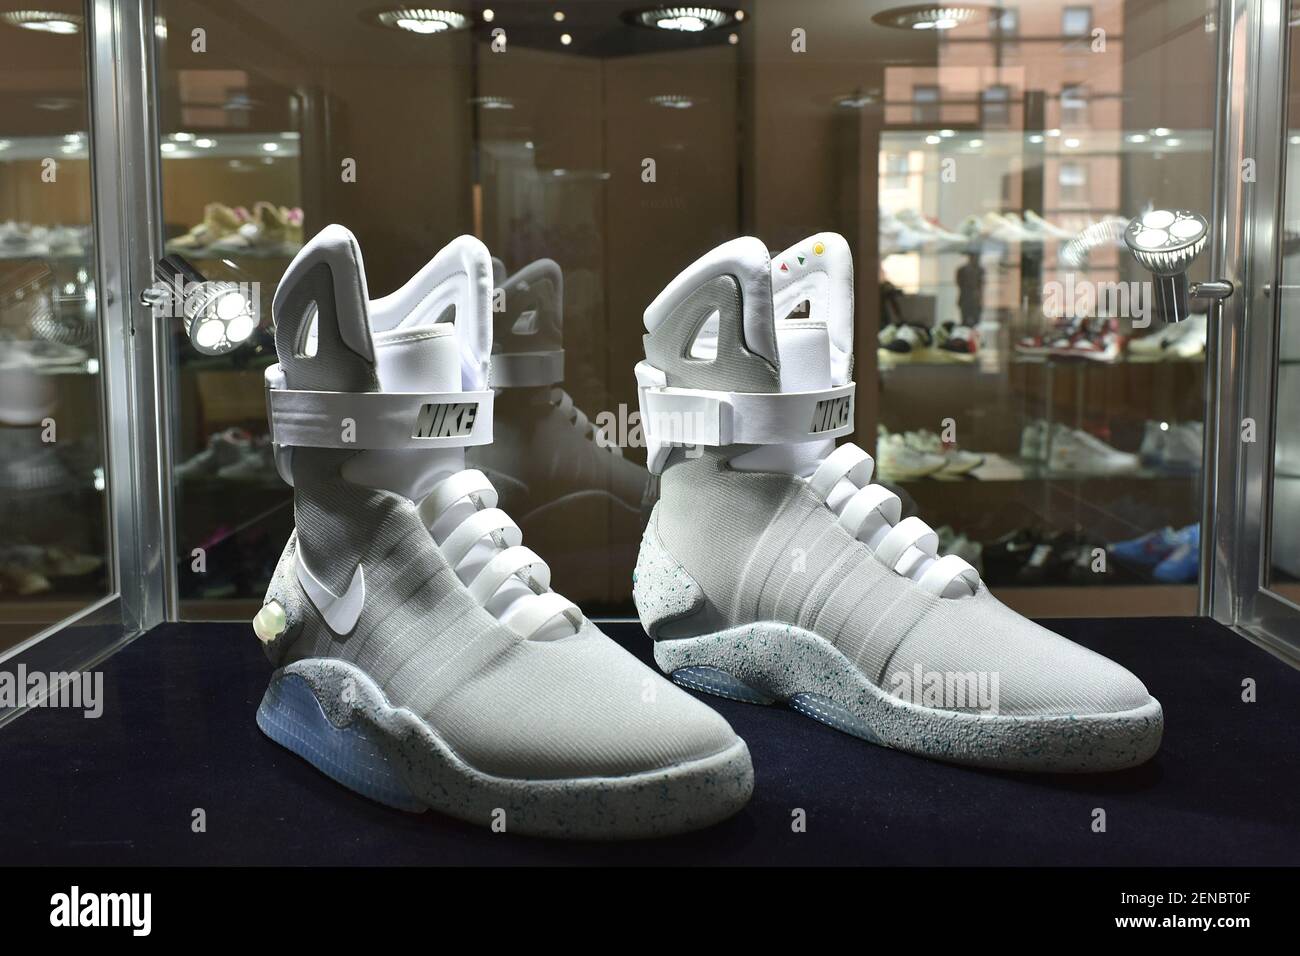 A pair of 2016 self-lacing “Back to the Future II” Nike Mags at Sotheby's &  Stadium Goods Ultimate Sneaker collection featuring 100 of the rarest  sneakers produced, New York, NY, July 22,